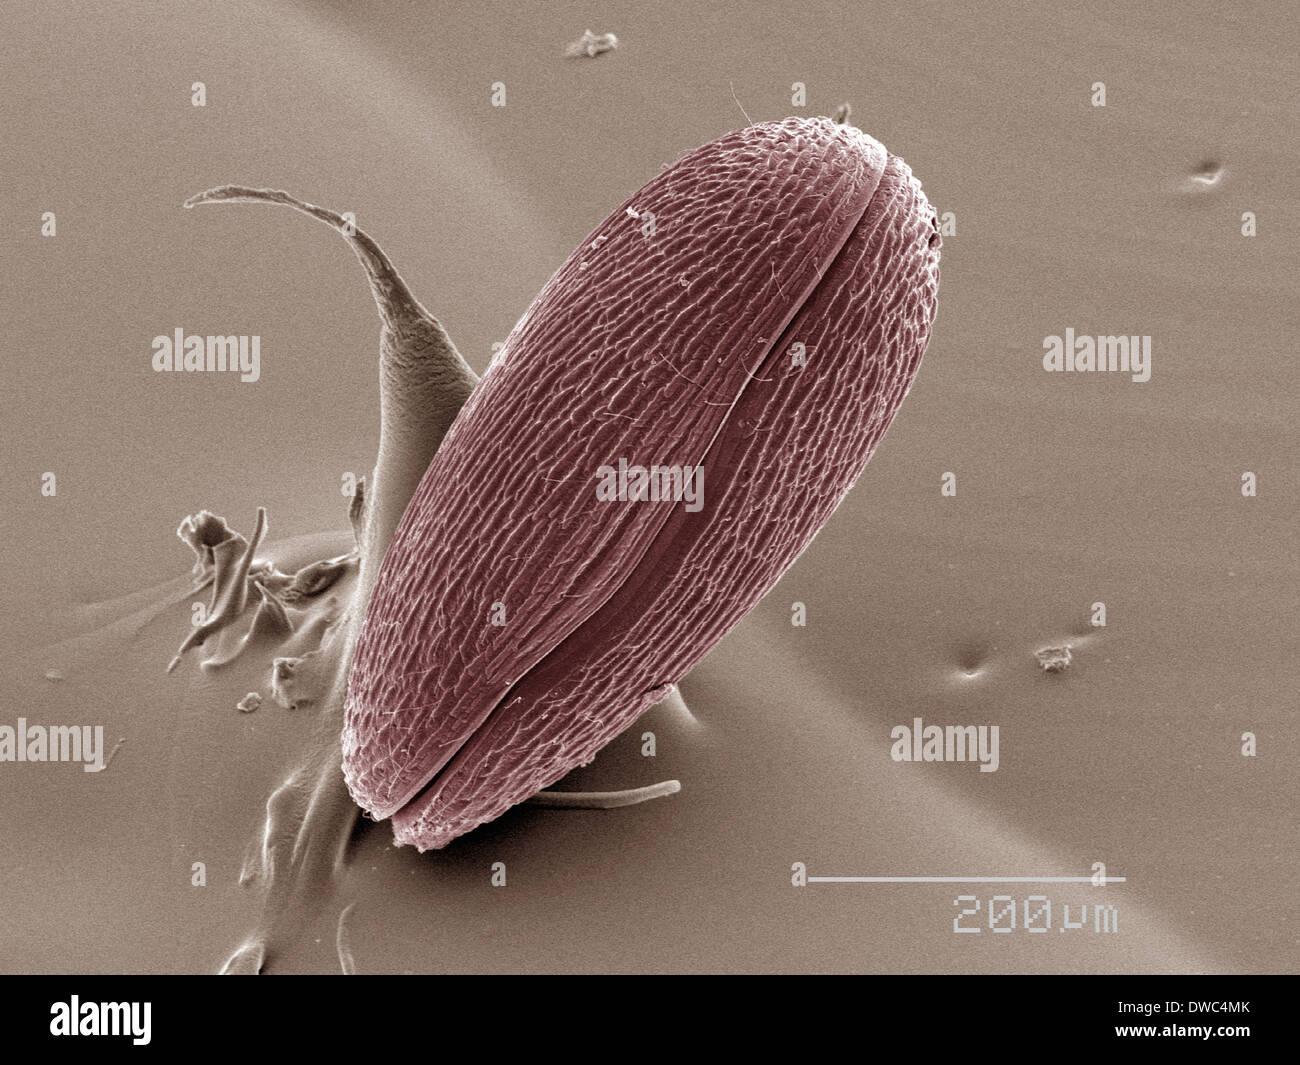 Coloured SEM of ostracod Stock Photo